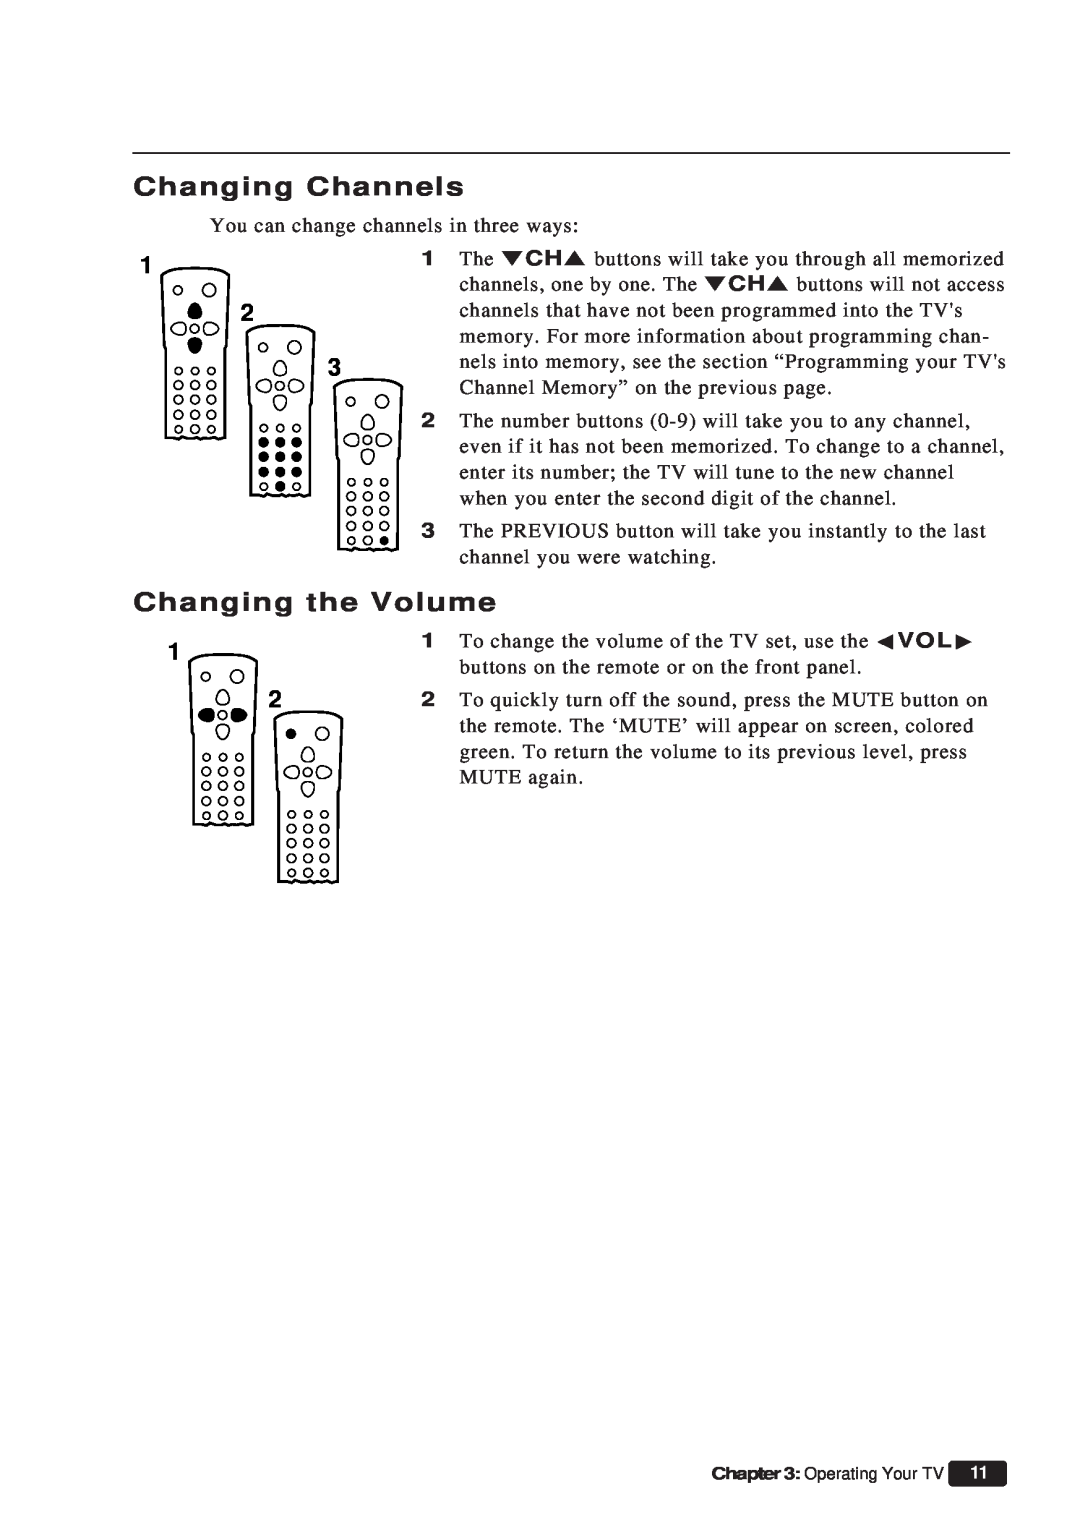 Daewoo ET 19P2, ET 13P2 instruction manual Changing Channels, Changing the Volume 